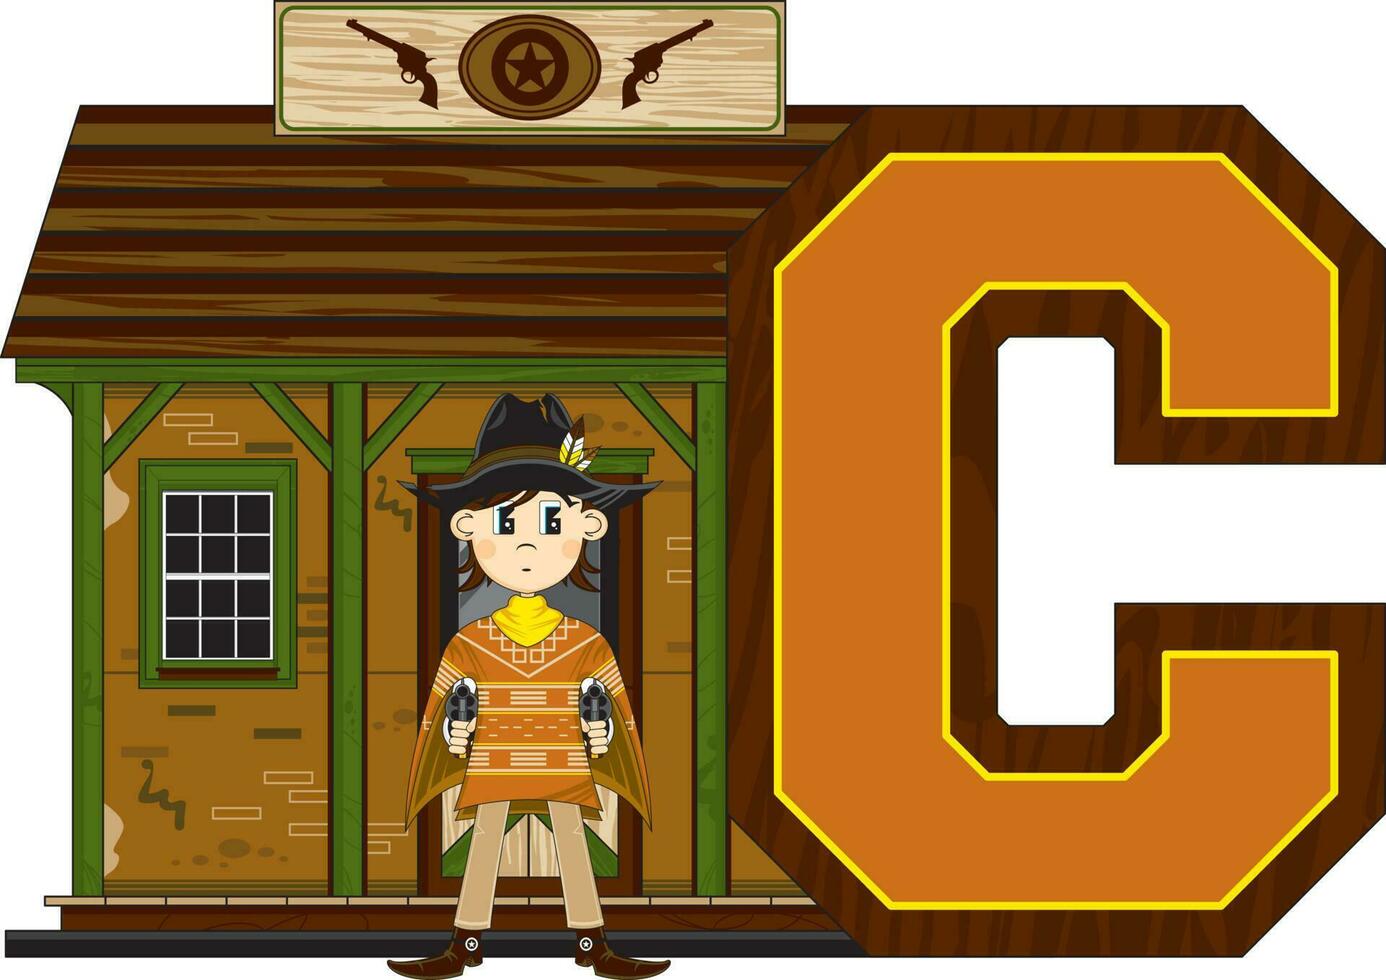 C is for Cowboy at the Jail Wild West Alphabet Learning Educational Illustration vector